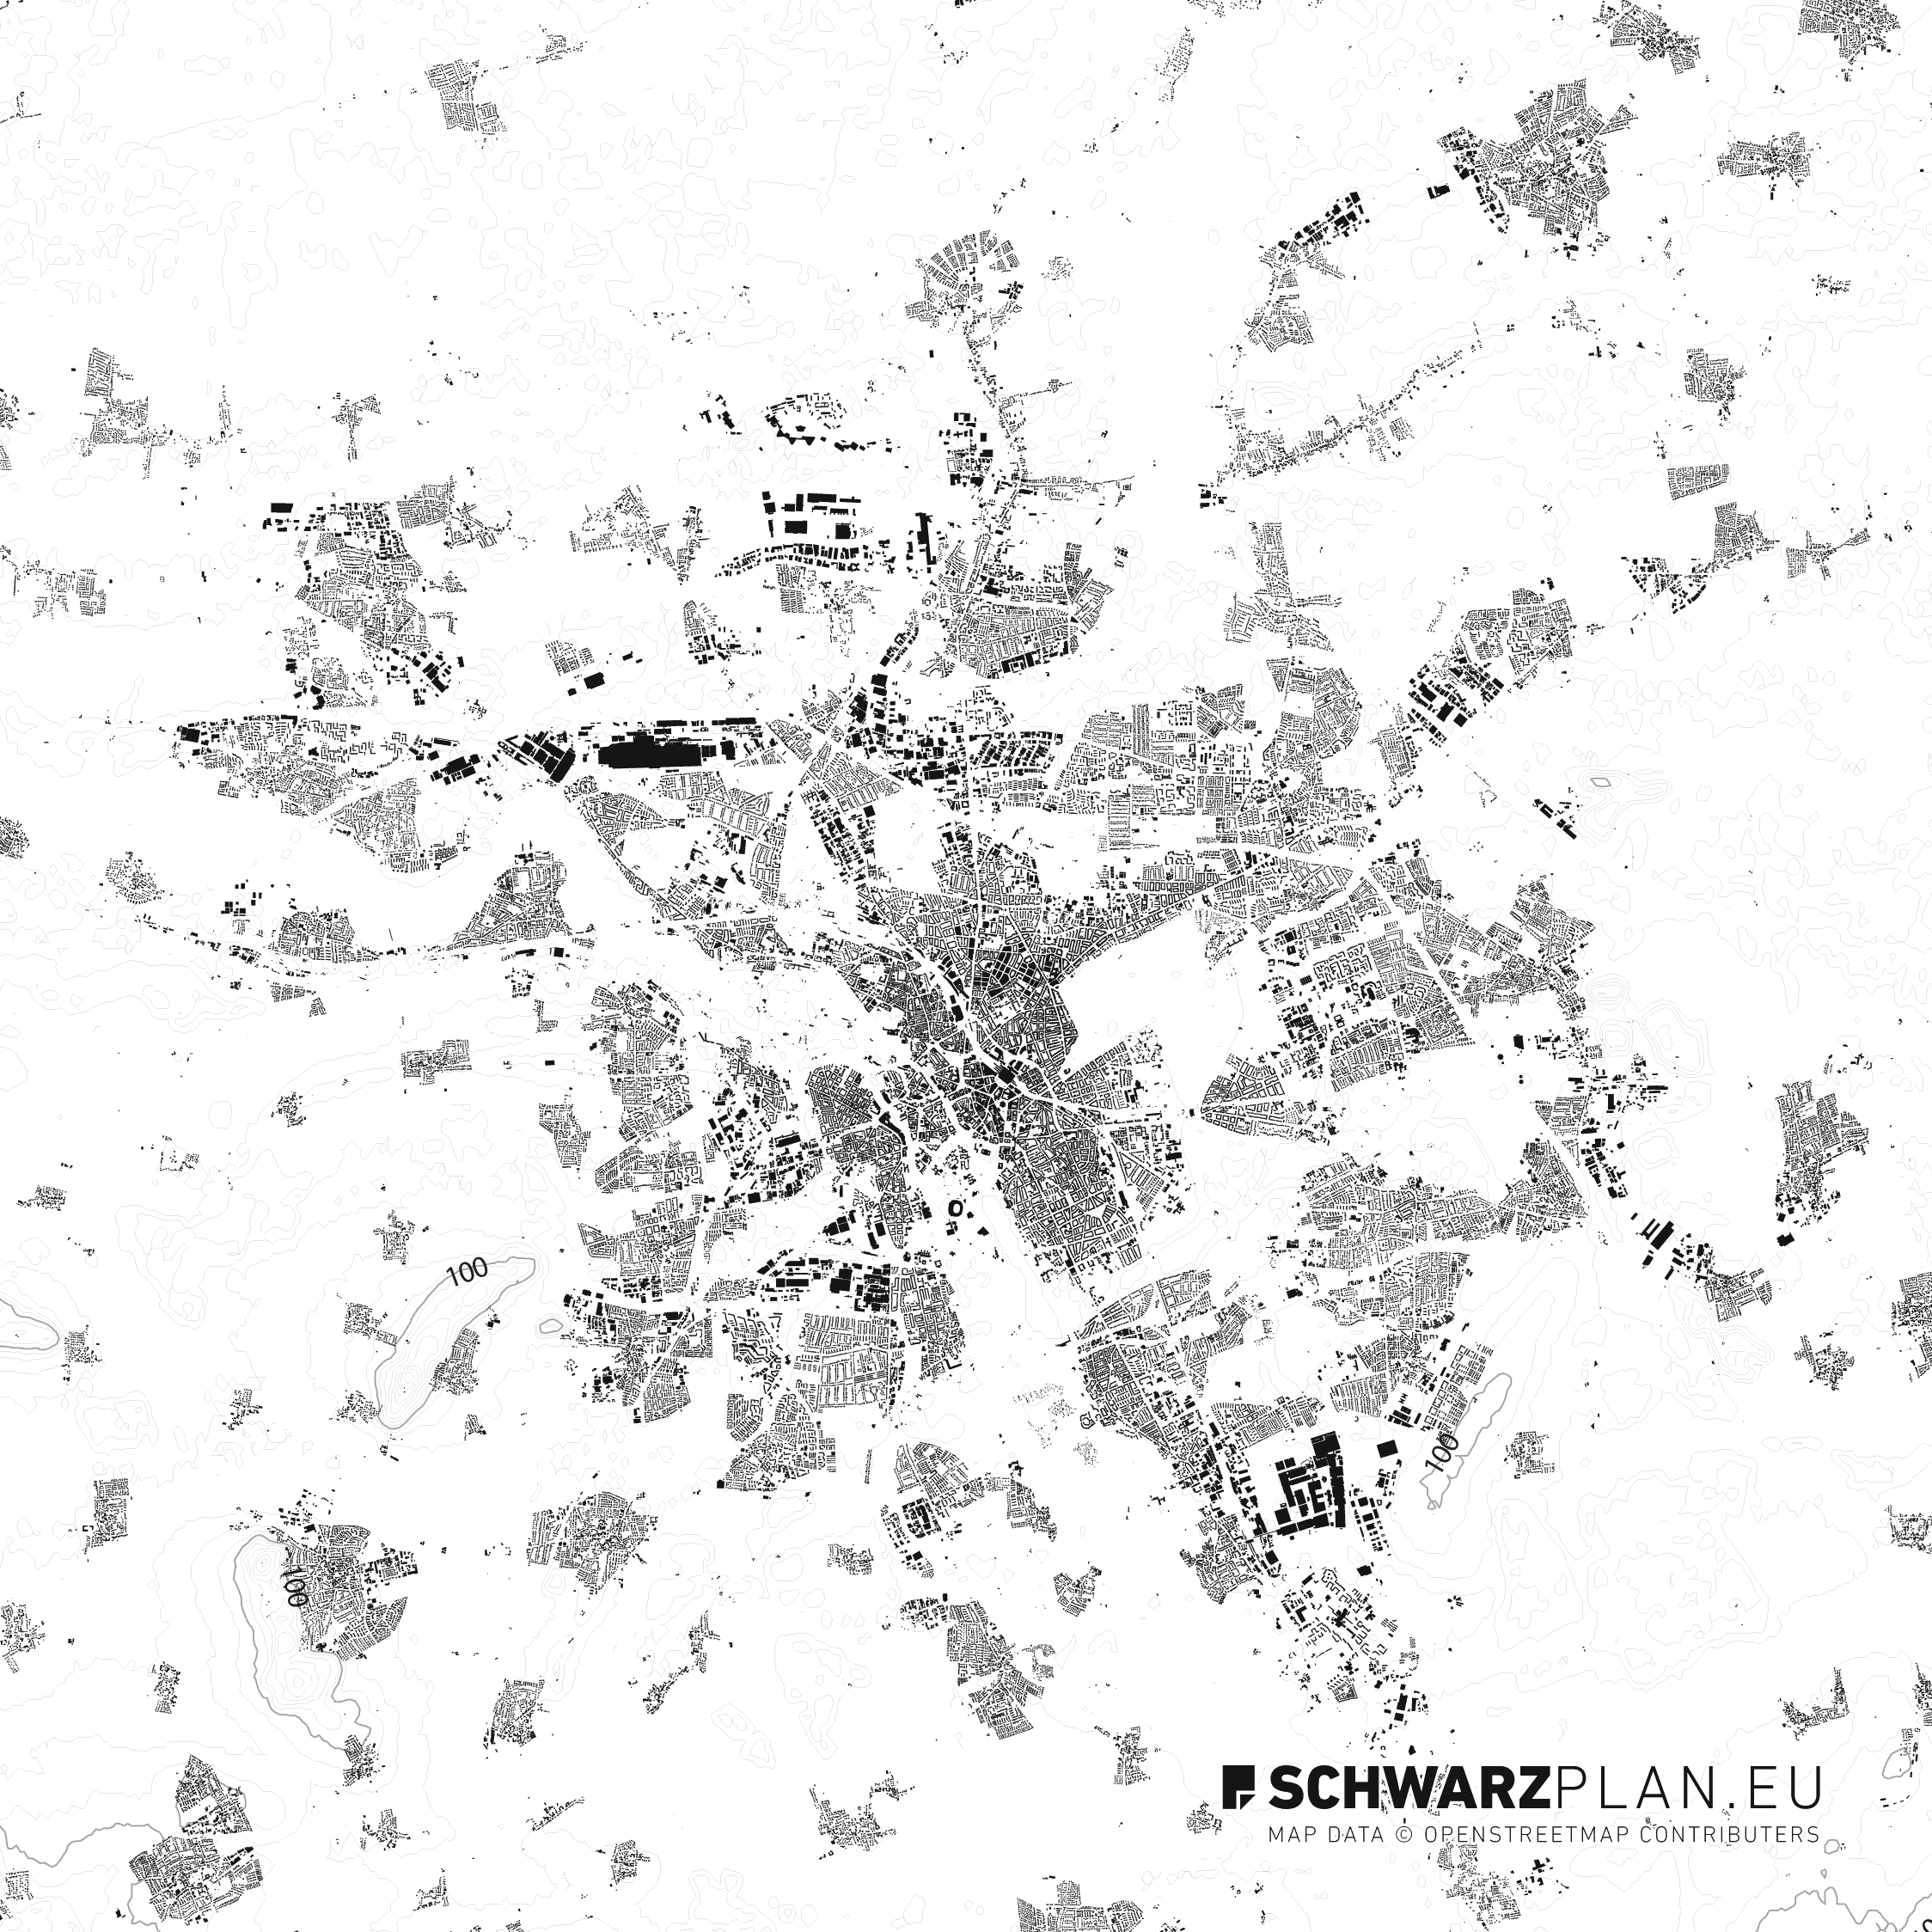 Figure Ground Plan of Hannover